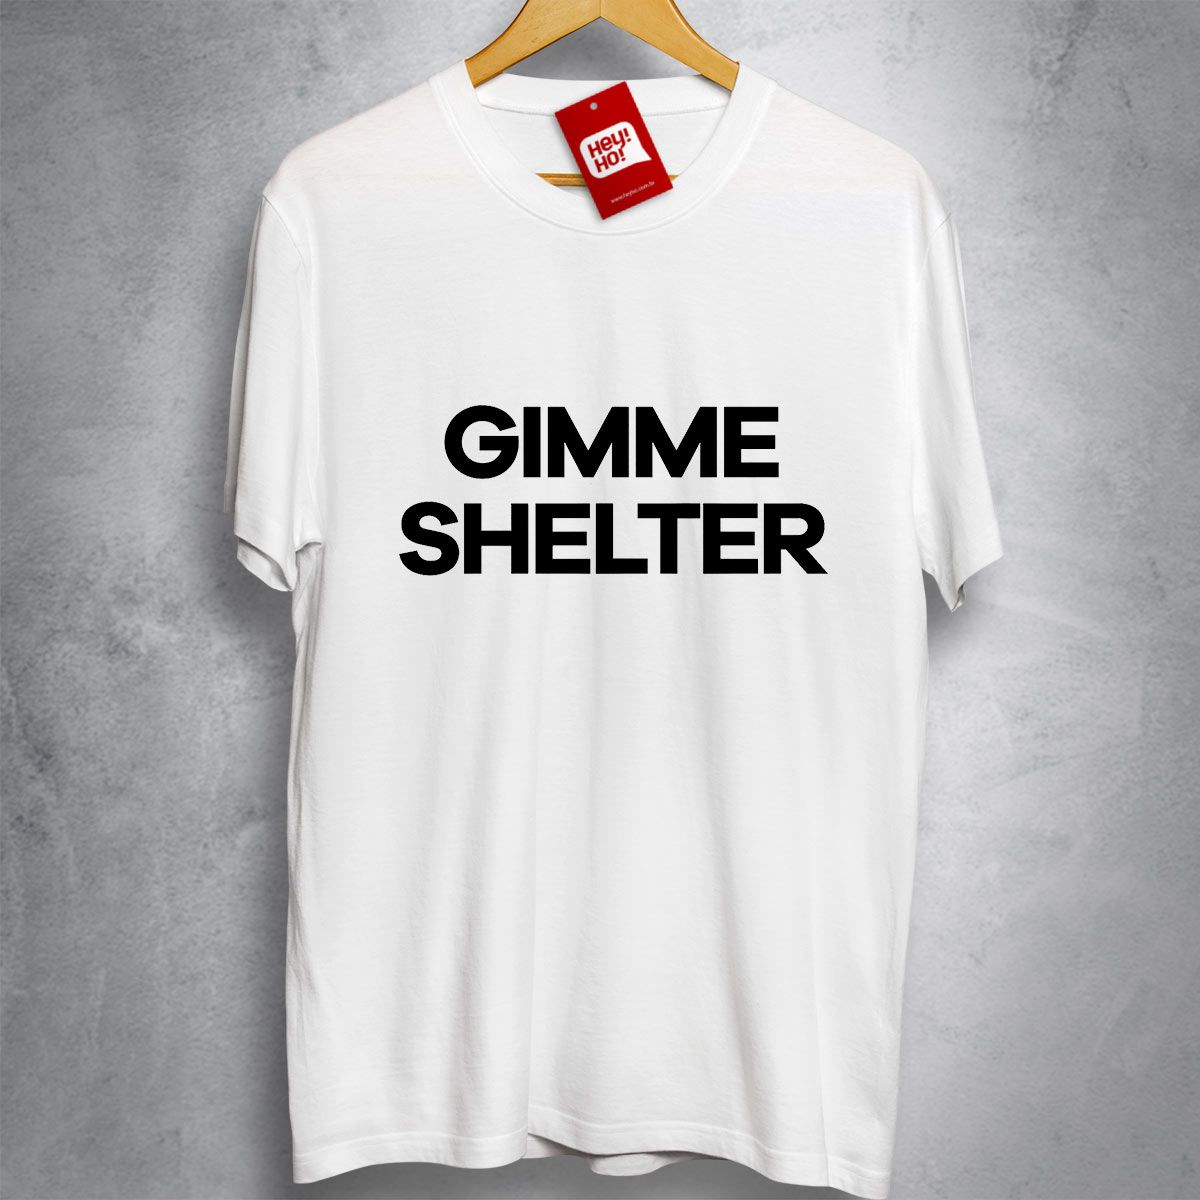 ROLLING STONES - Gimme shelter